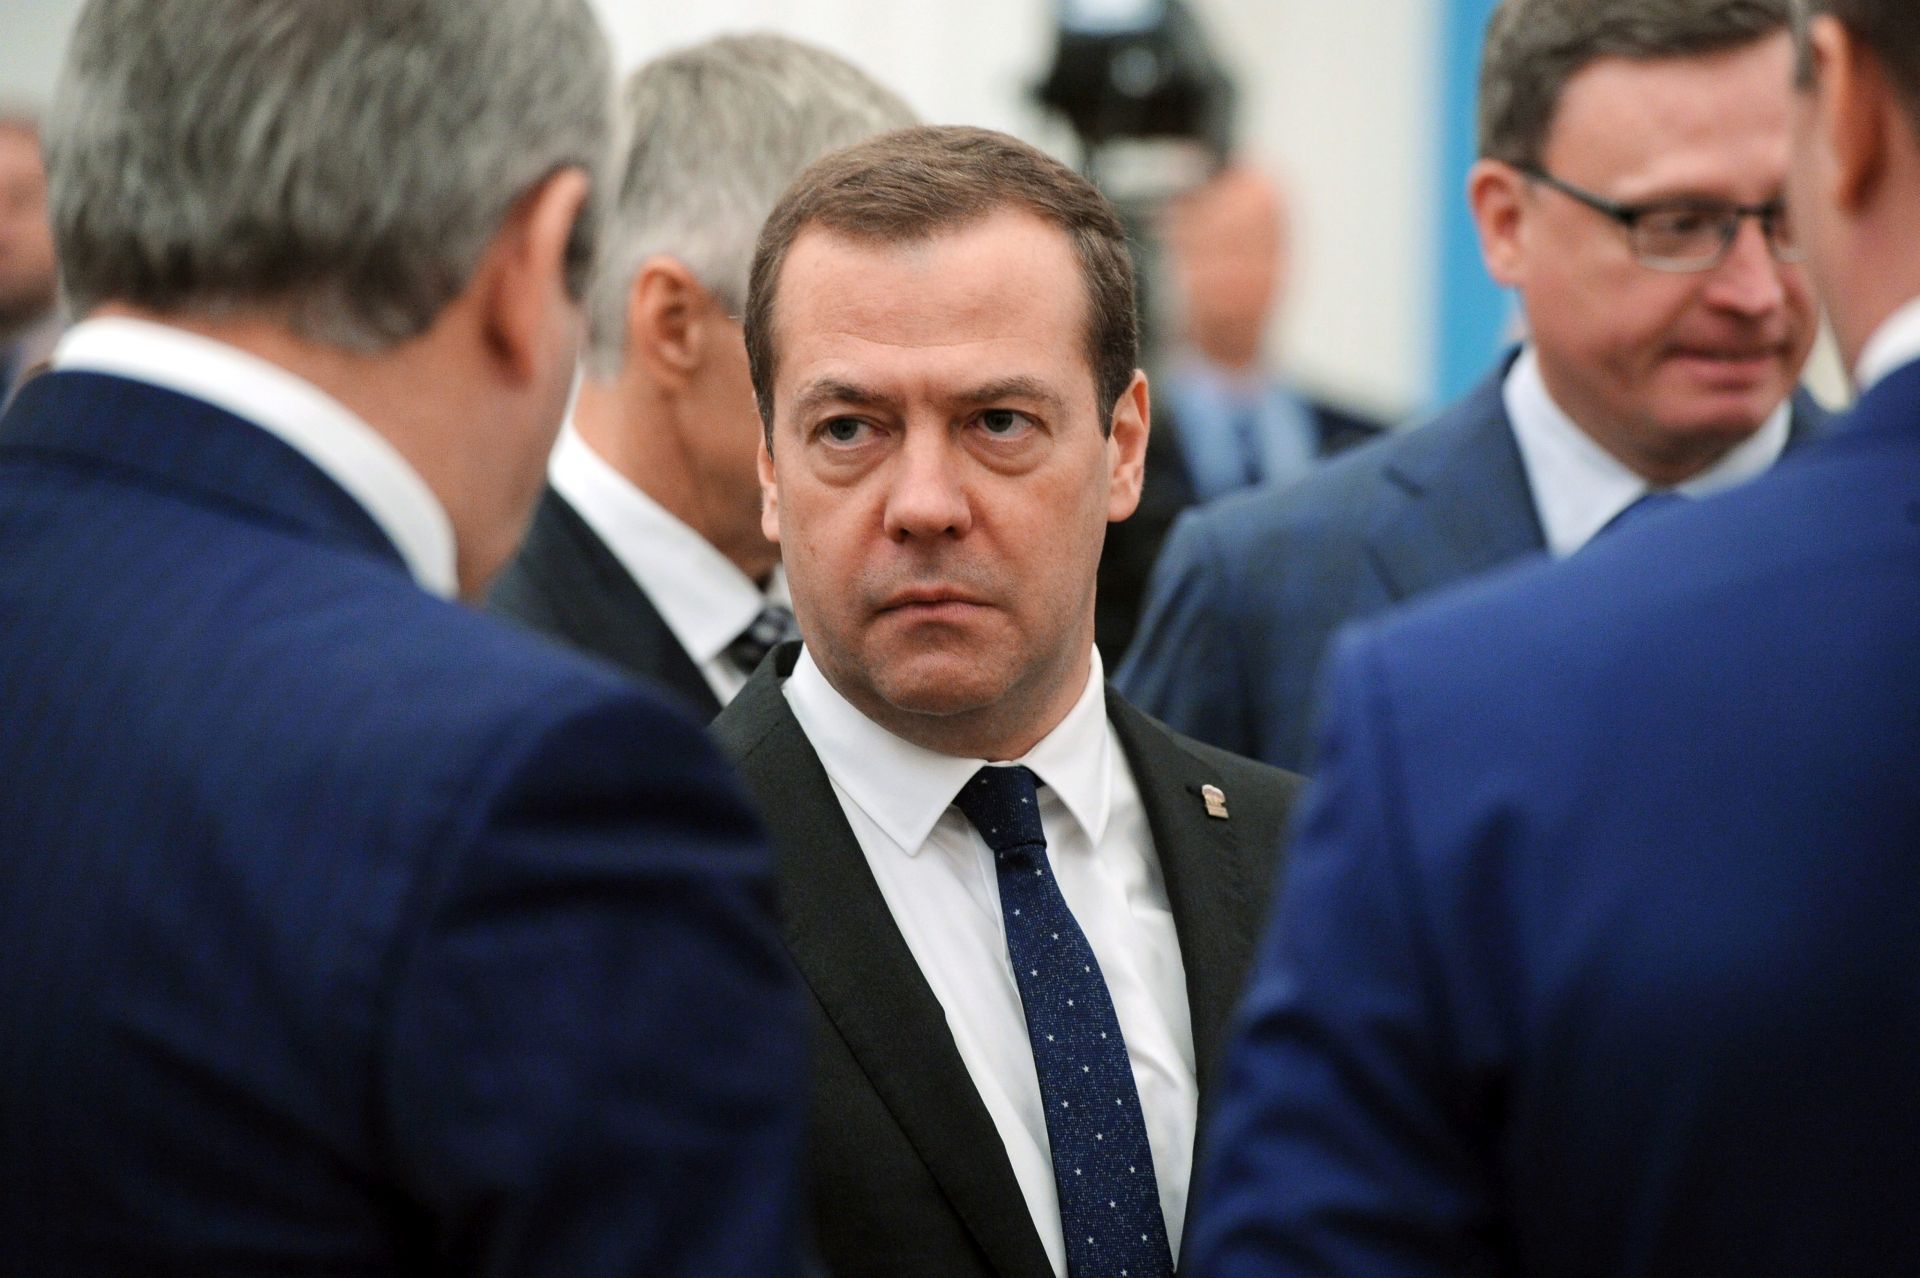 epa05553265 Russian Prime Minister Dmitry Medvedev (C) prior a meeting of Putin with leaders of political parties which have obtained State Duma seats in the parliamentary elections, in the Kremlin in Moscow, Russia, 23 September 2016. Vladimir Putin named  Vyacheslav Volodin a candidate for the post of new State Duma speaker.  EPA/MICHAEL KLIMENTYEV / SPUTNIK / KREMLIN POOL MANDATORY CREDIT